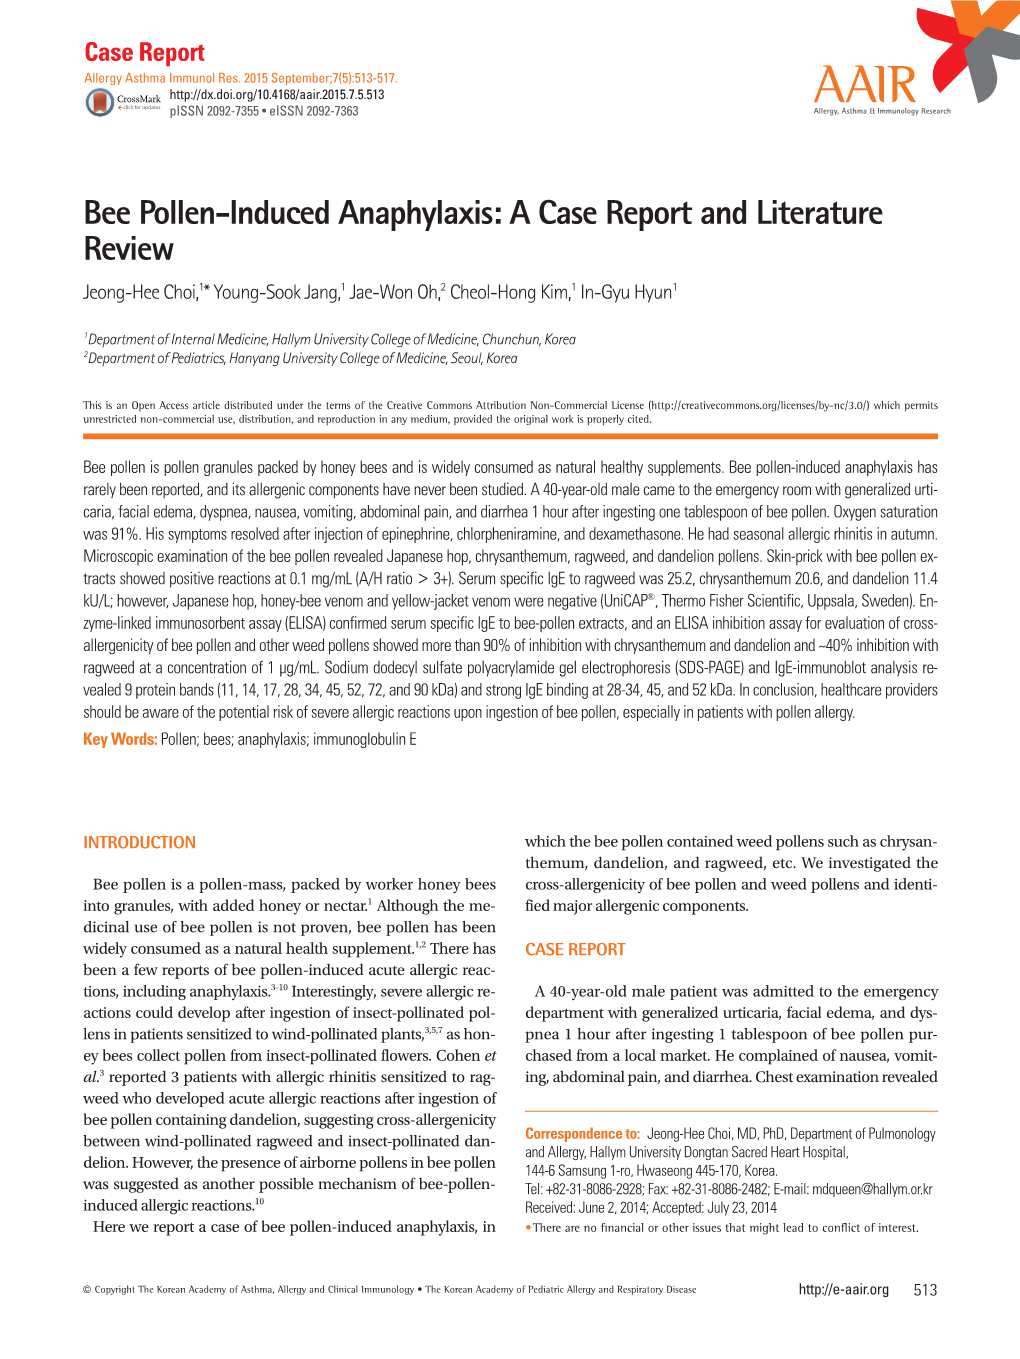 Bee Pollen-Induced Anaphylaxis: a Case Report and Literature Review Jeong-Hee Choi,1* Young-Sook Jang,1 Jae-Won Oh,2 Cheol-Hong Kim,1 In-Gyu Hyun1